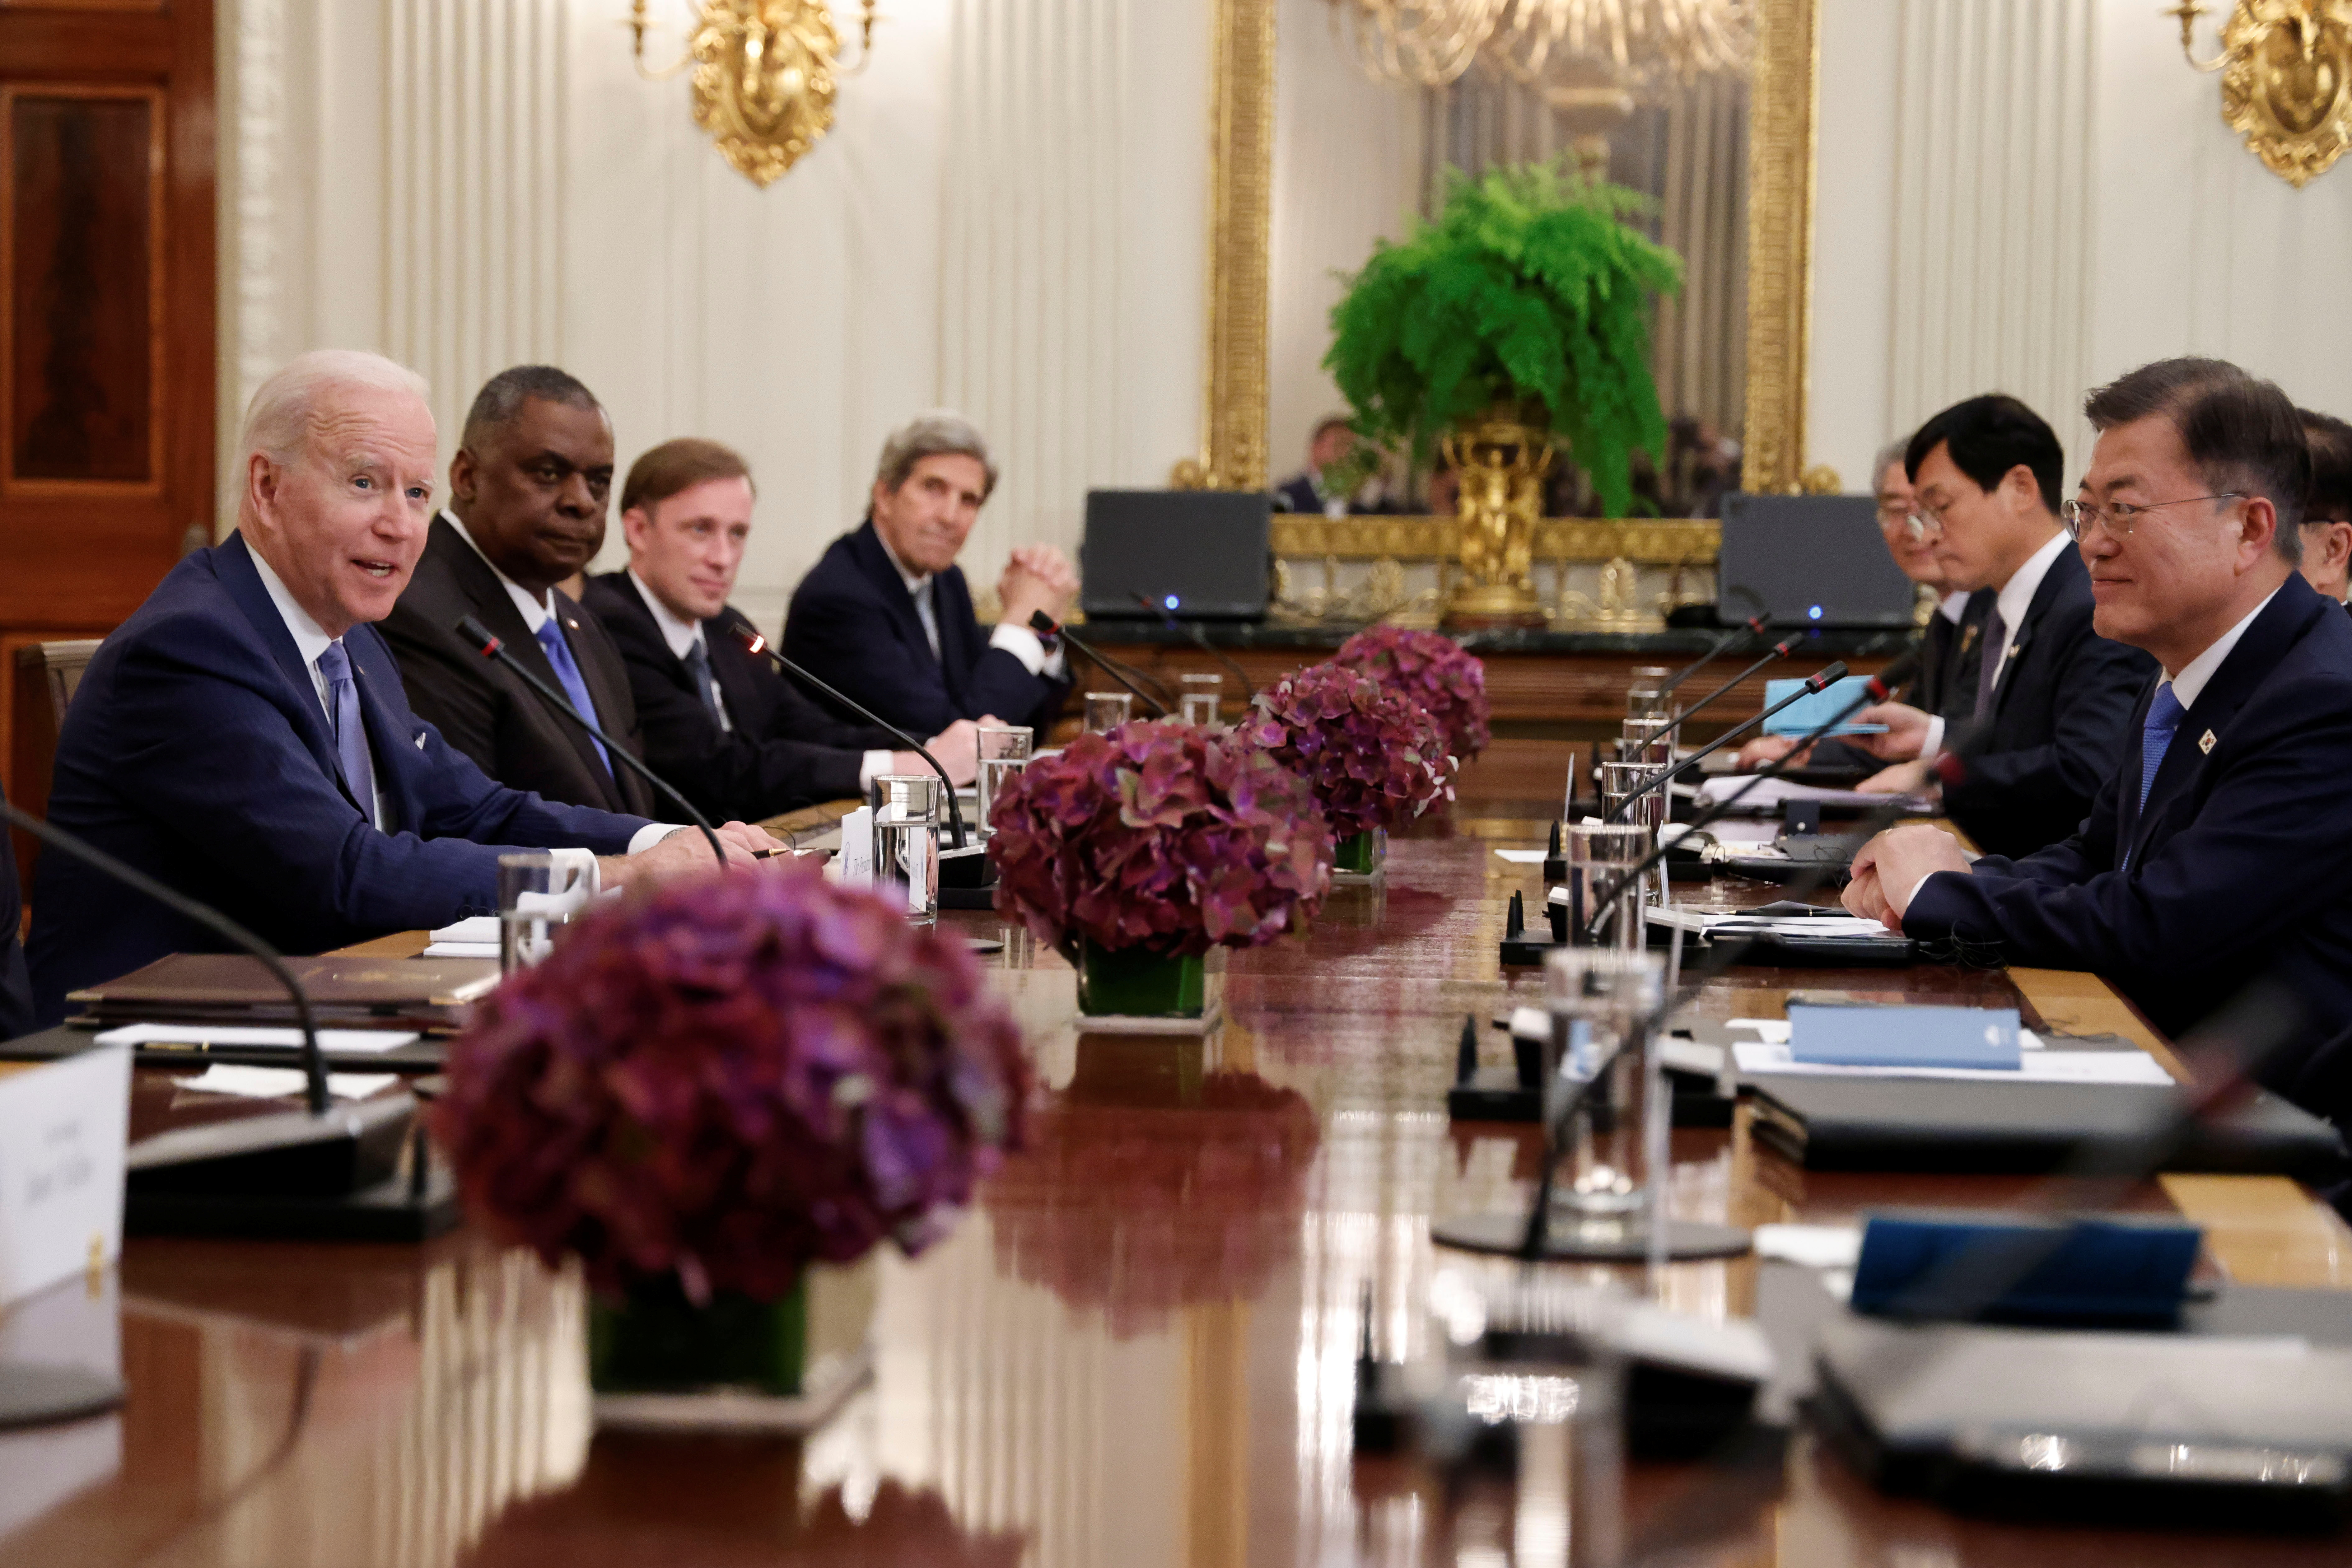 U.S. President Biden and South Korea's President Moon Jae-in participate in an expanded bilateral meeting at the White House